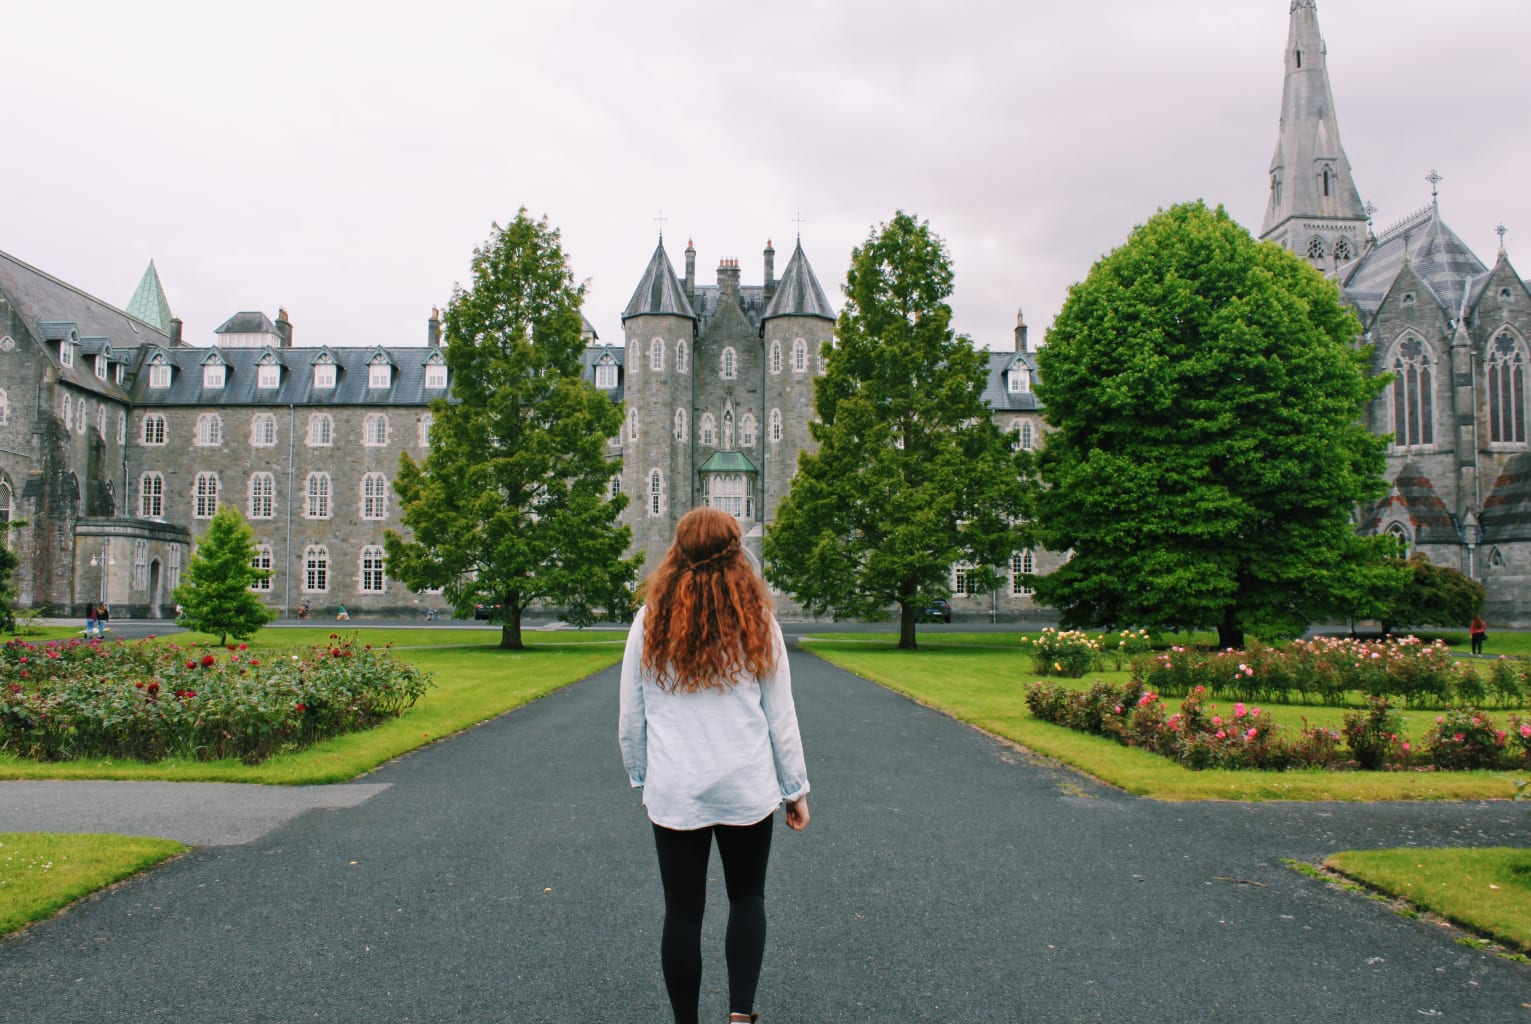 A student standing in a courtyard in Maynooth, Ireland.